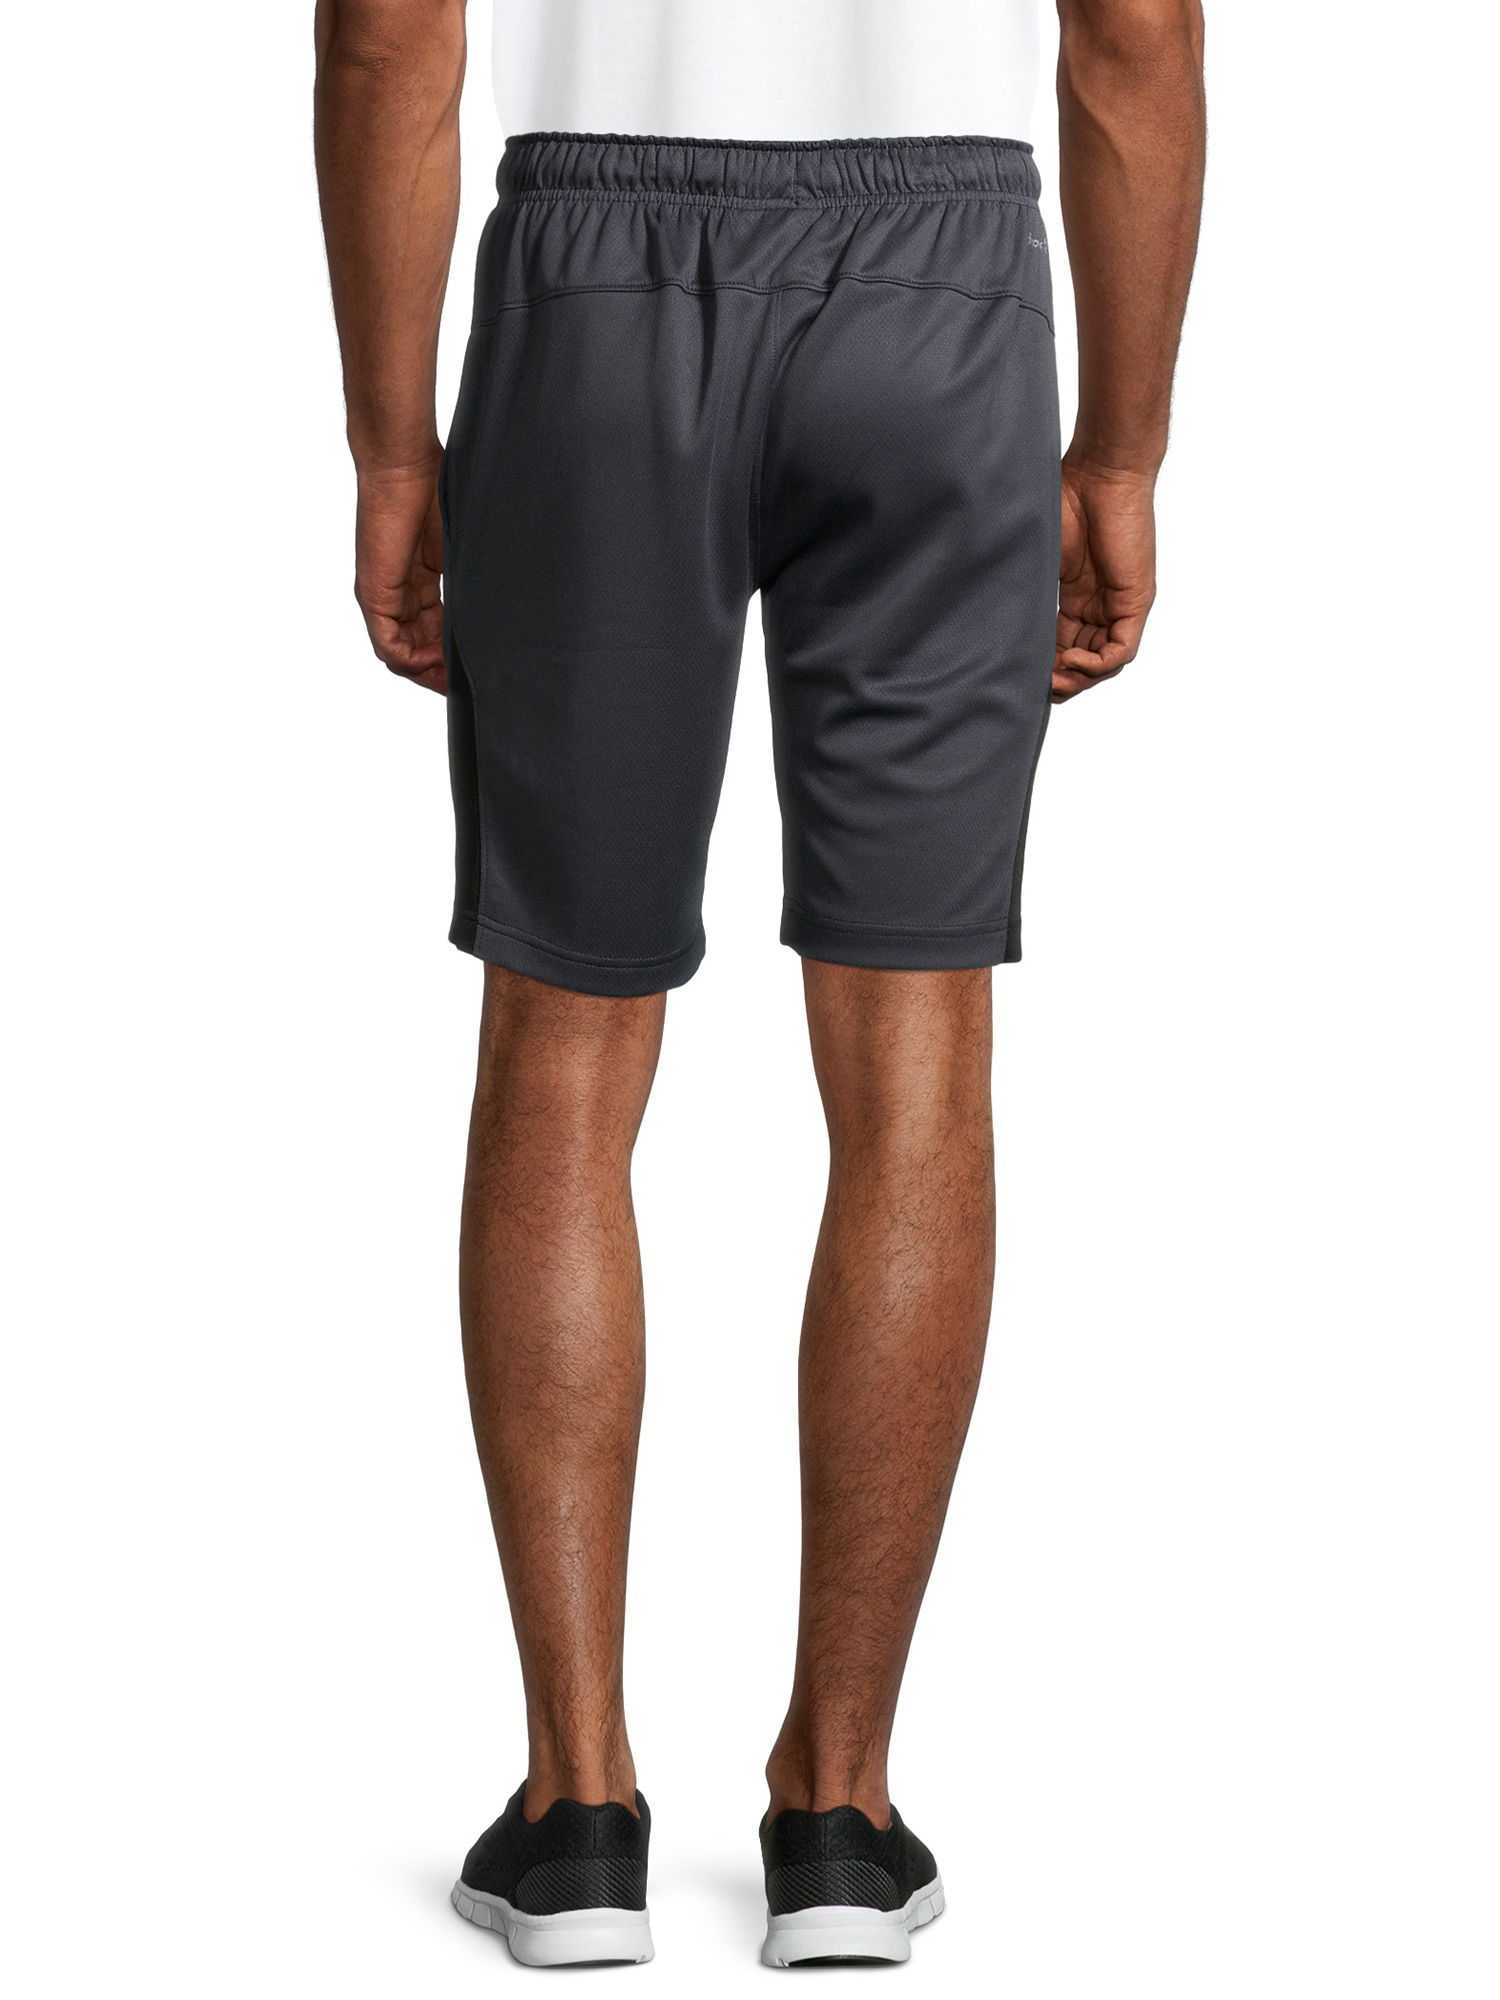 Russell Men's and Big Men's 9" Core Training Active Shorts, up to Size 5xl - image 5 of 6